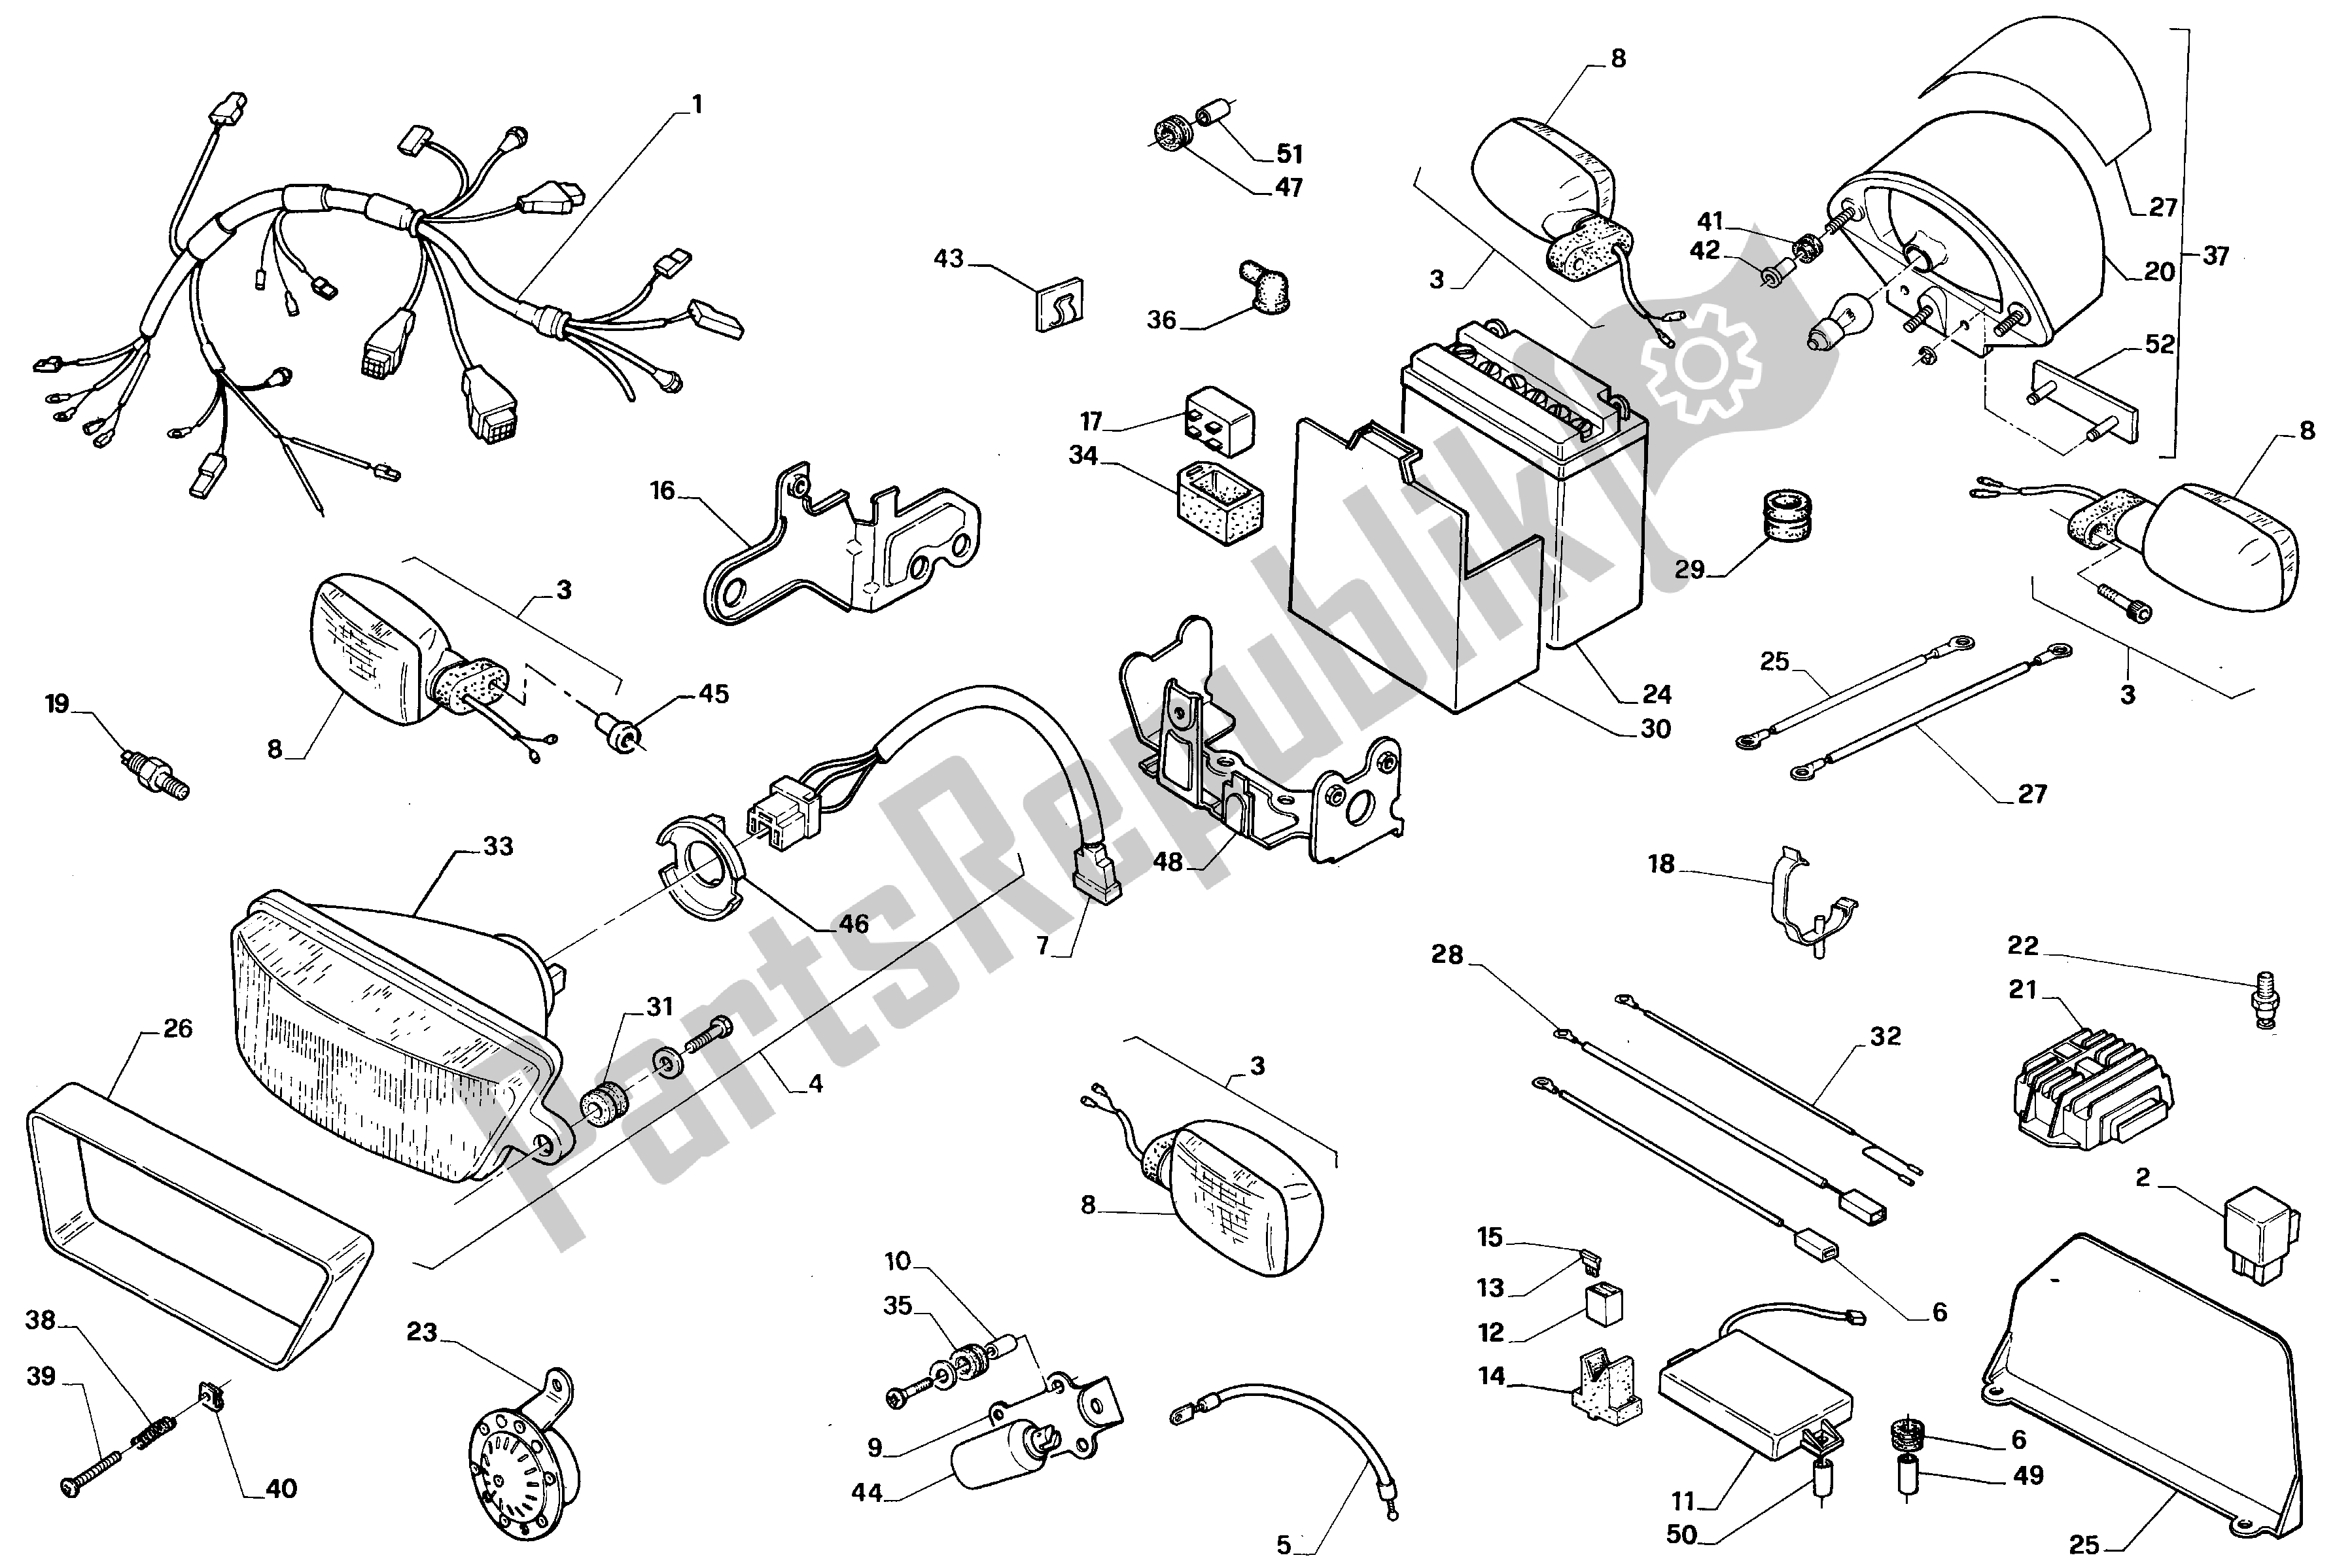 All parts for the Electrical System of the Aprilia RS 125 1992 - 1994